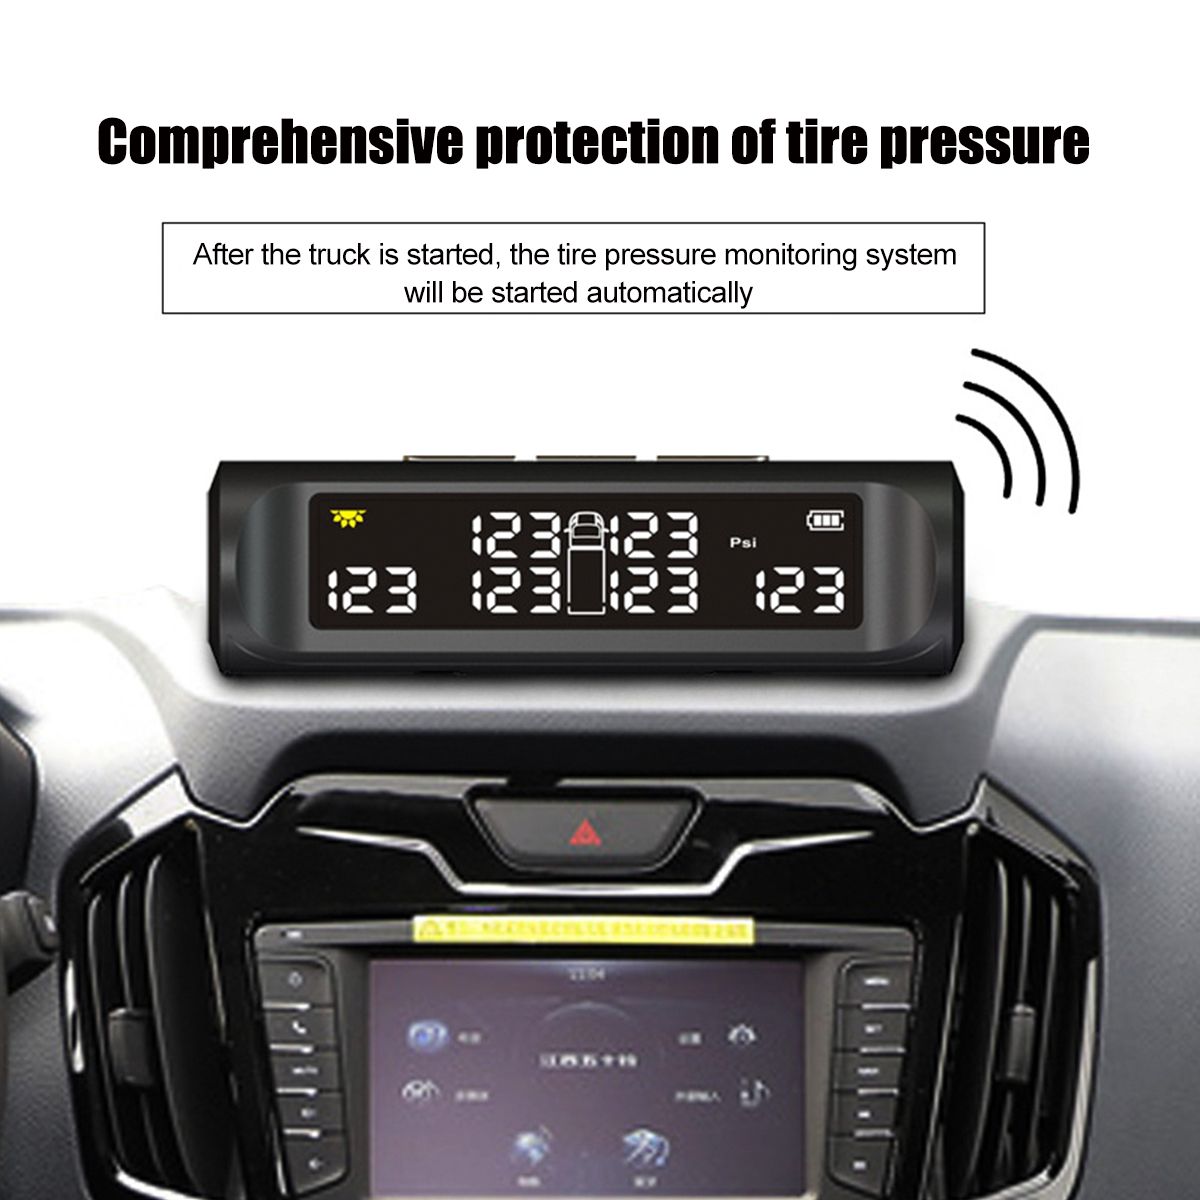 Wireless-Tire-Pressure-Monitor-System-Solar-External-TPMS-with-6-Sensor-for-Car-RV-Truck-1726186